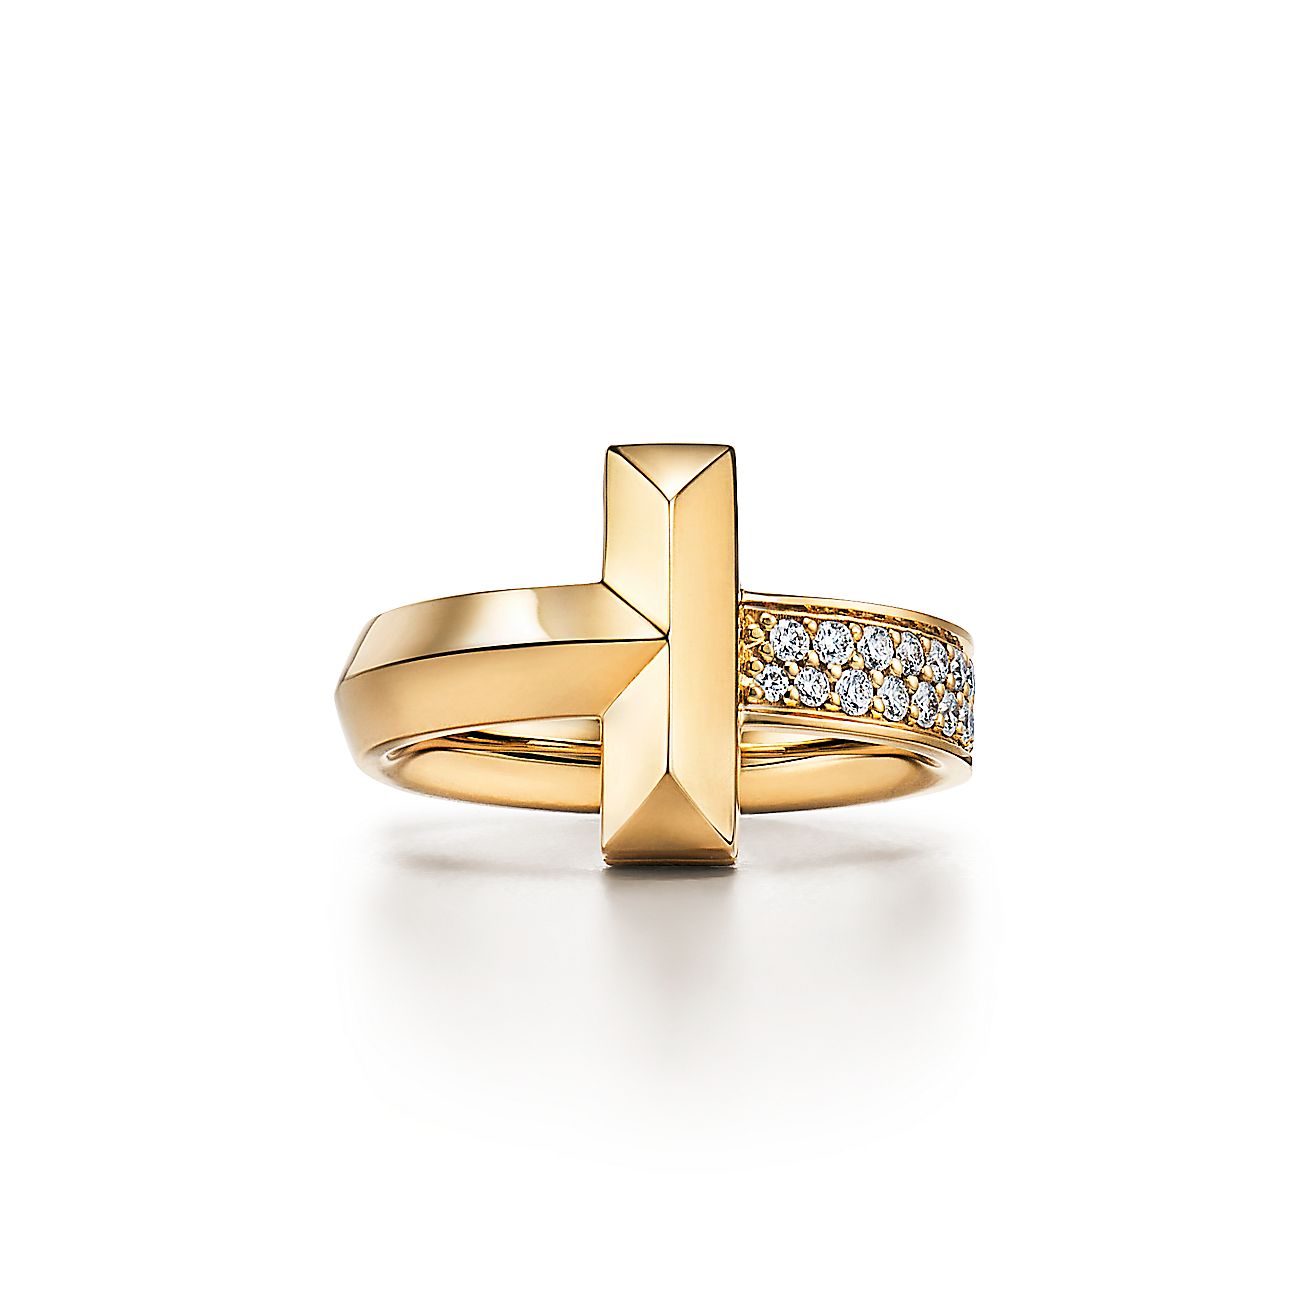 Tiffany T T1 Ring in Yellow Gold, 2.5 mm Wide, Size: 7 1/2